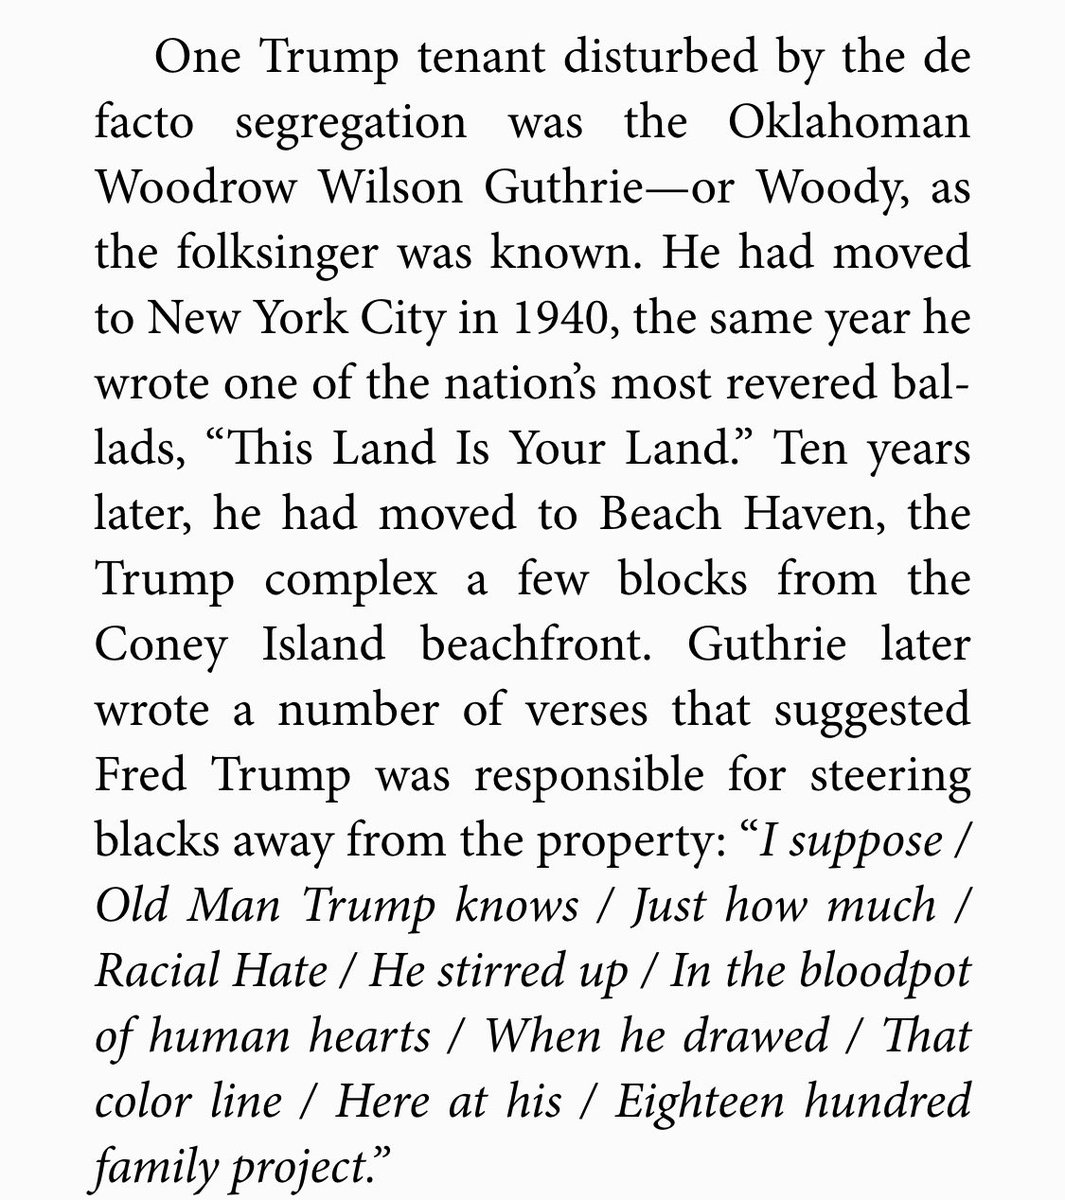 WOODY GUTHRIE(after Living in????apt)Wrote extra Verse About Trump’s Dad’s No BLKS Policy In“THIS LAND IS YOUR LAND”‼️ https://t.co/zQ4NzKd0zC